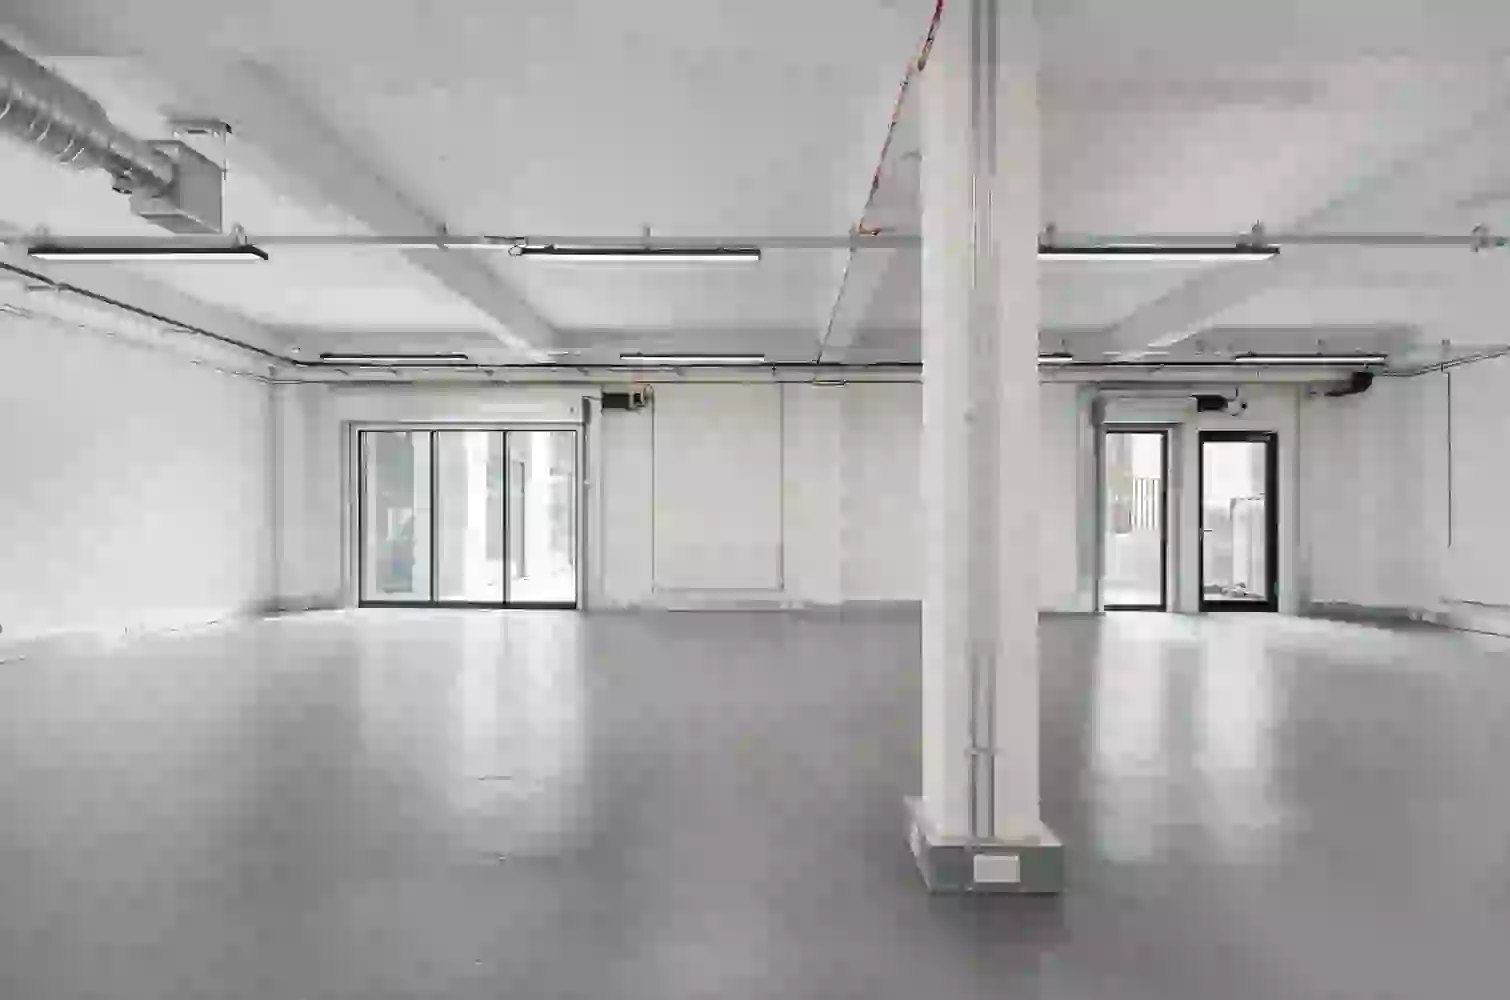 Office space to rent at Fuel Tank, 8-12 Creekside, London, unit FT.A01, 1444 sq ft (134 sq m).